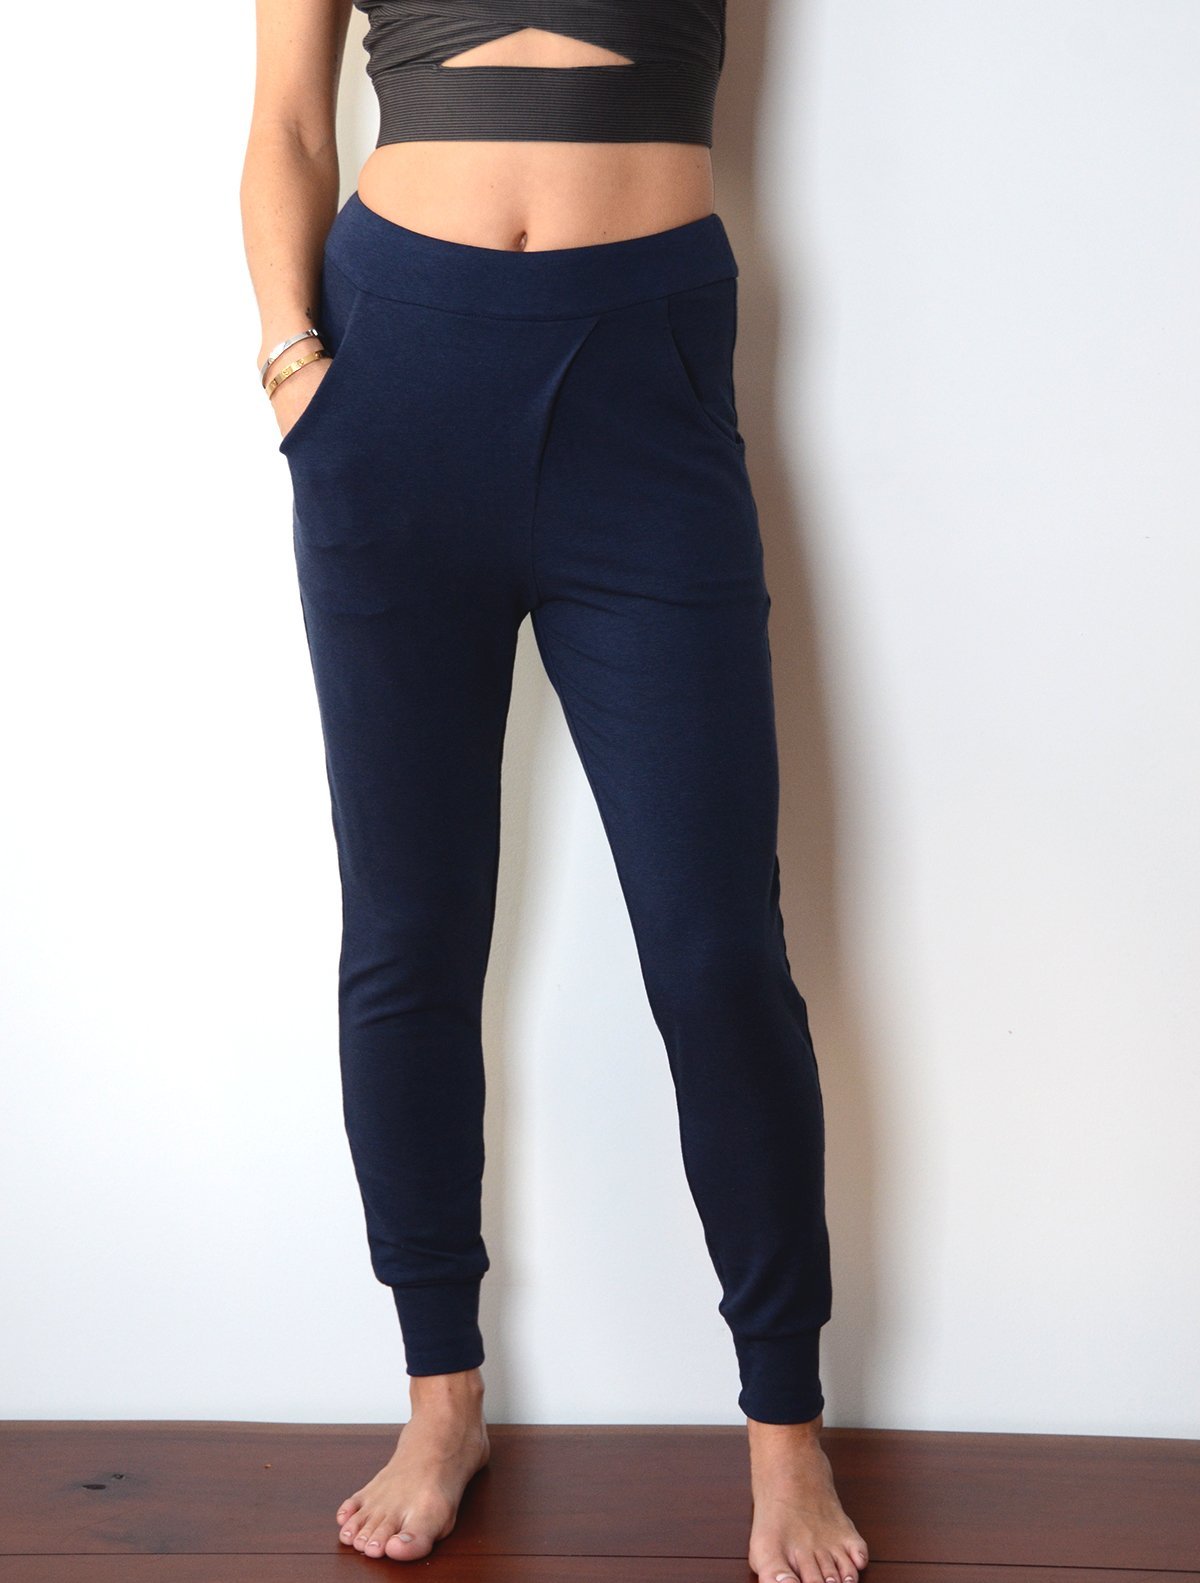 front view of model wearing simulacra's navy blue french terry trouser pants with pockets